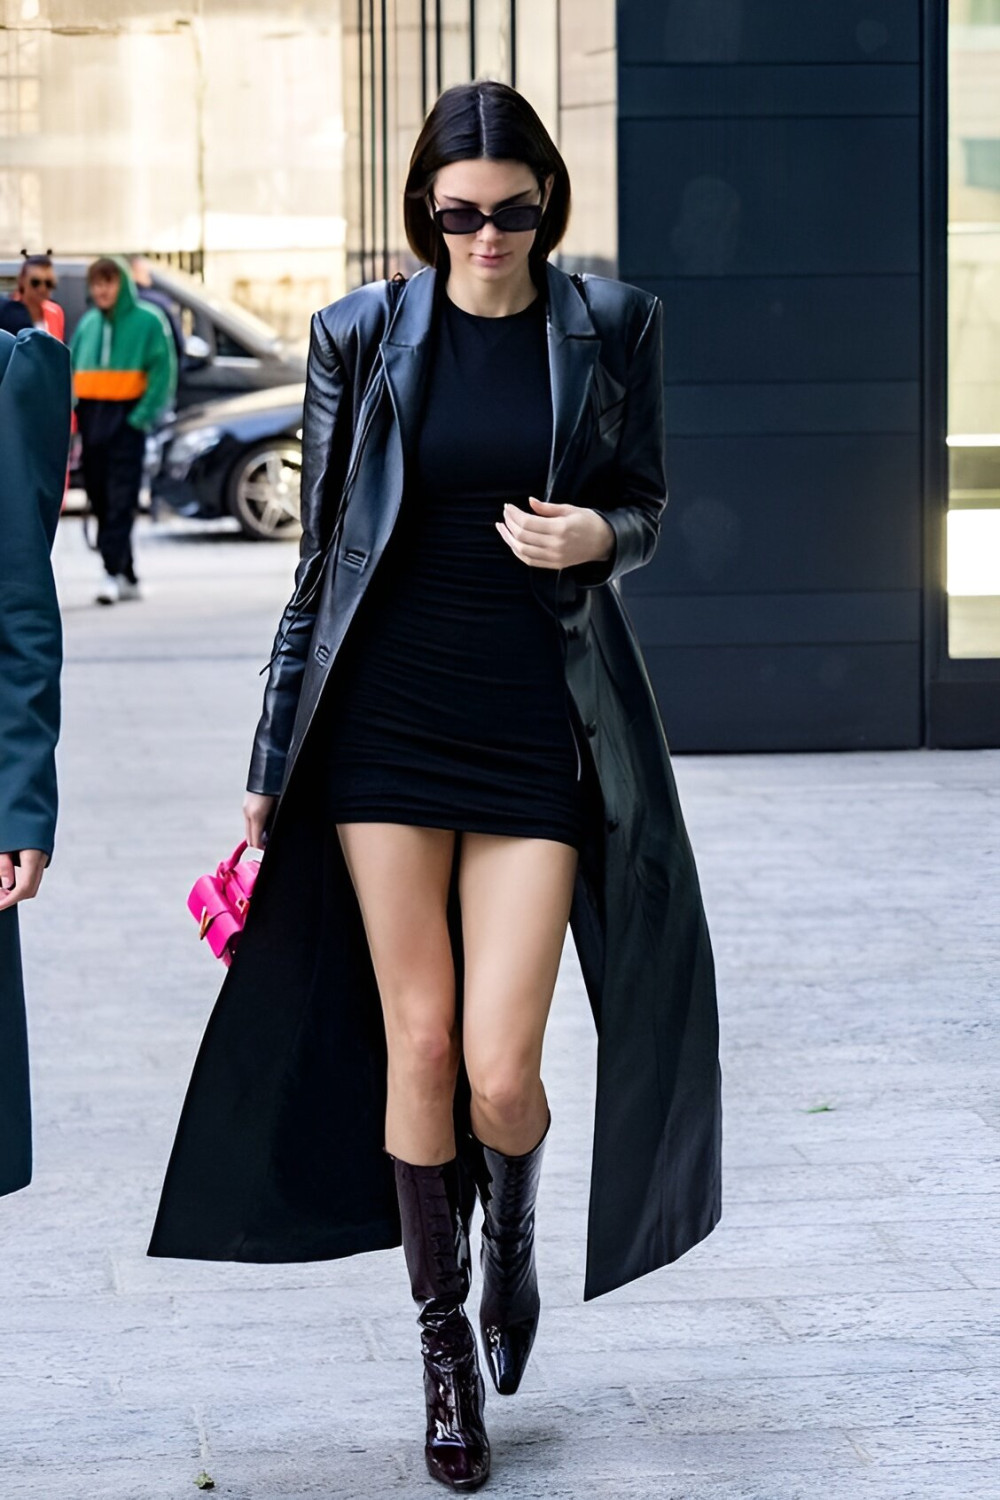 Black Dress And Long Leather Coat